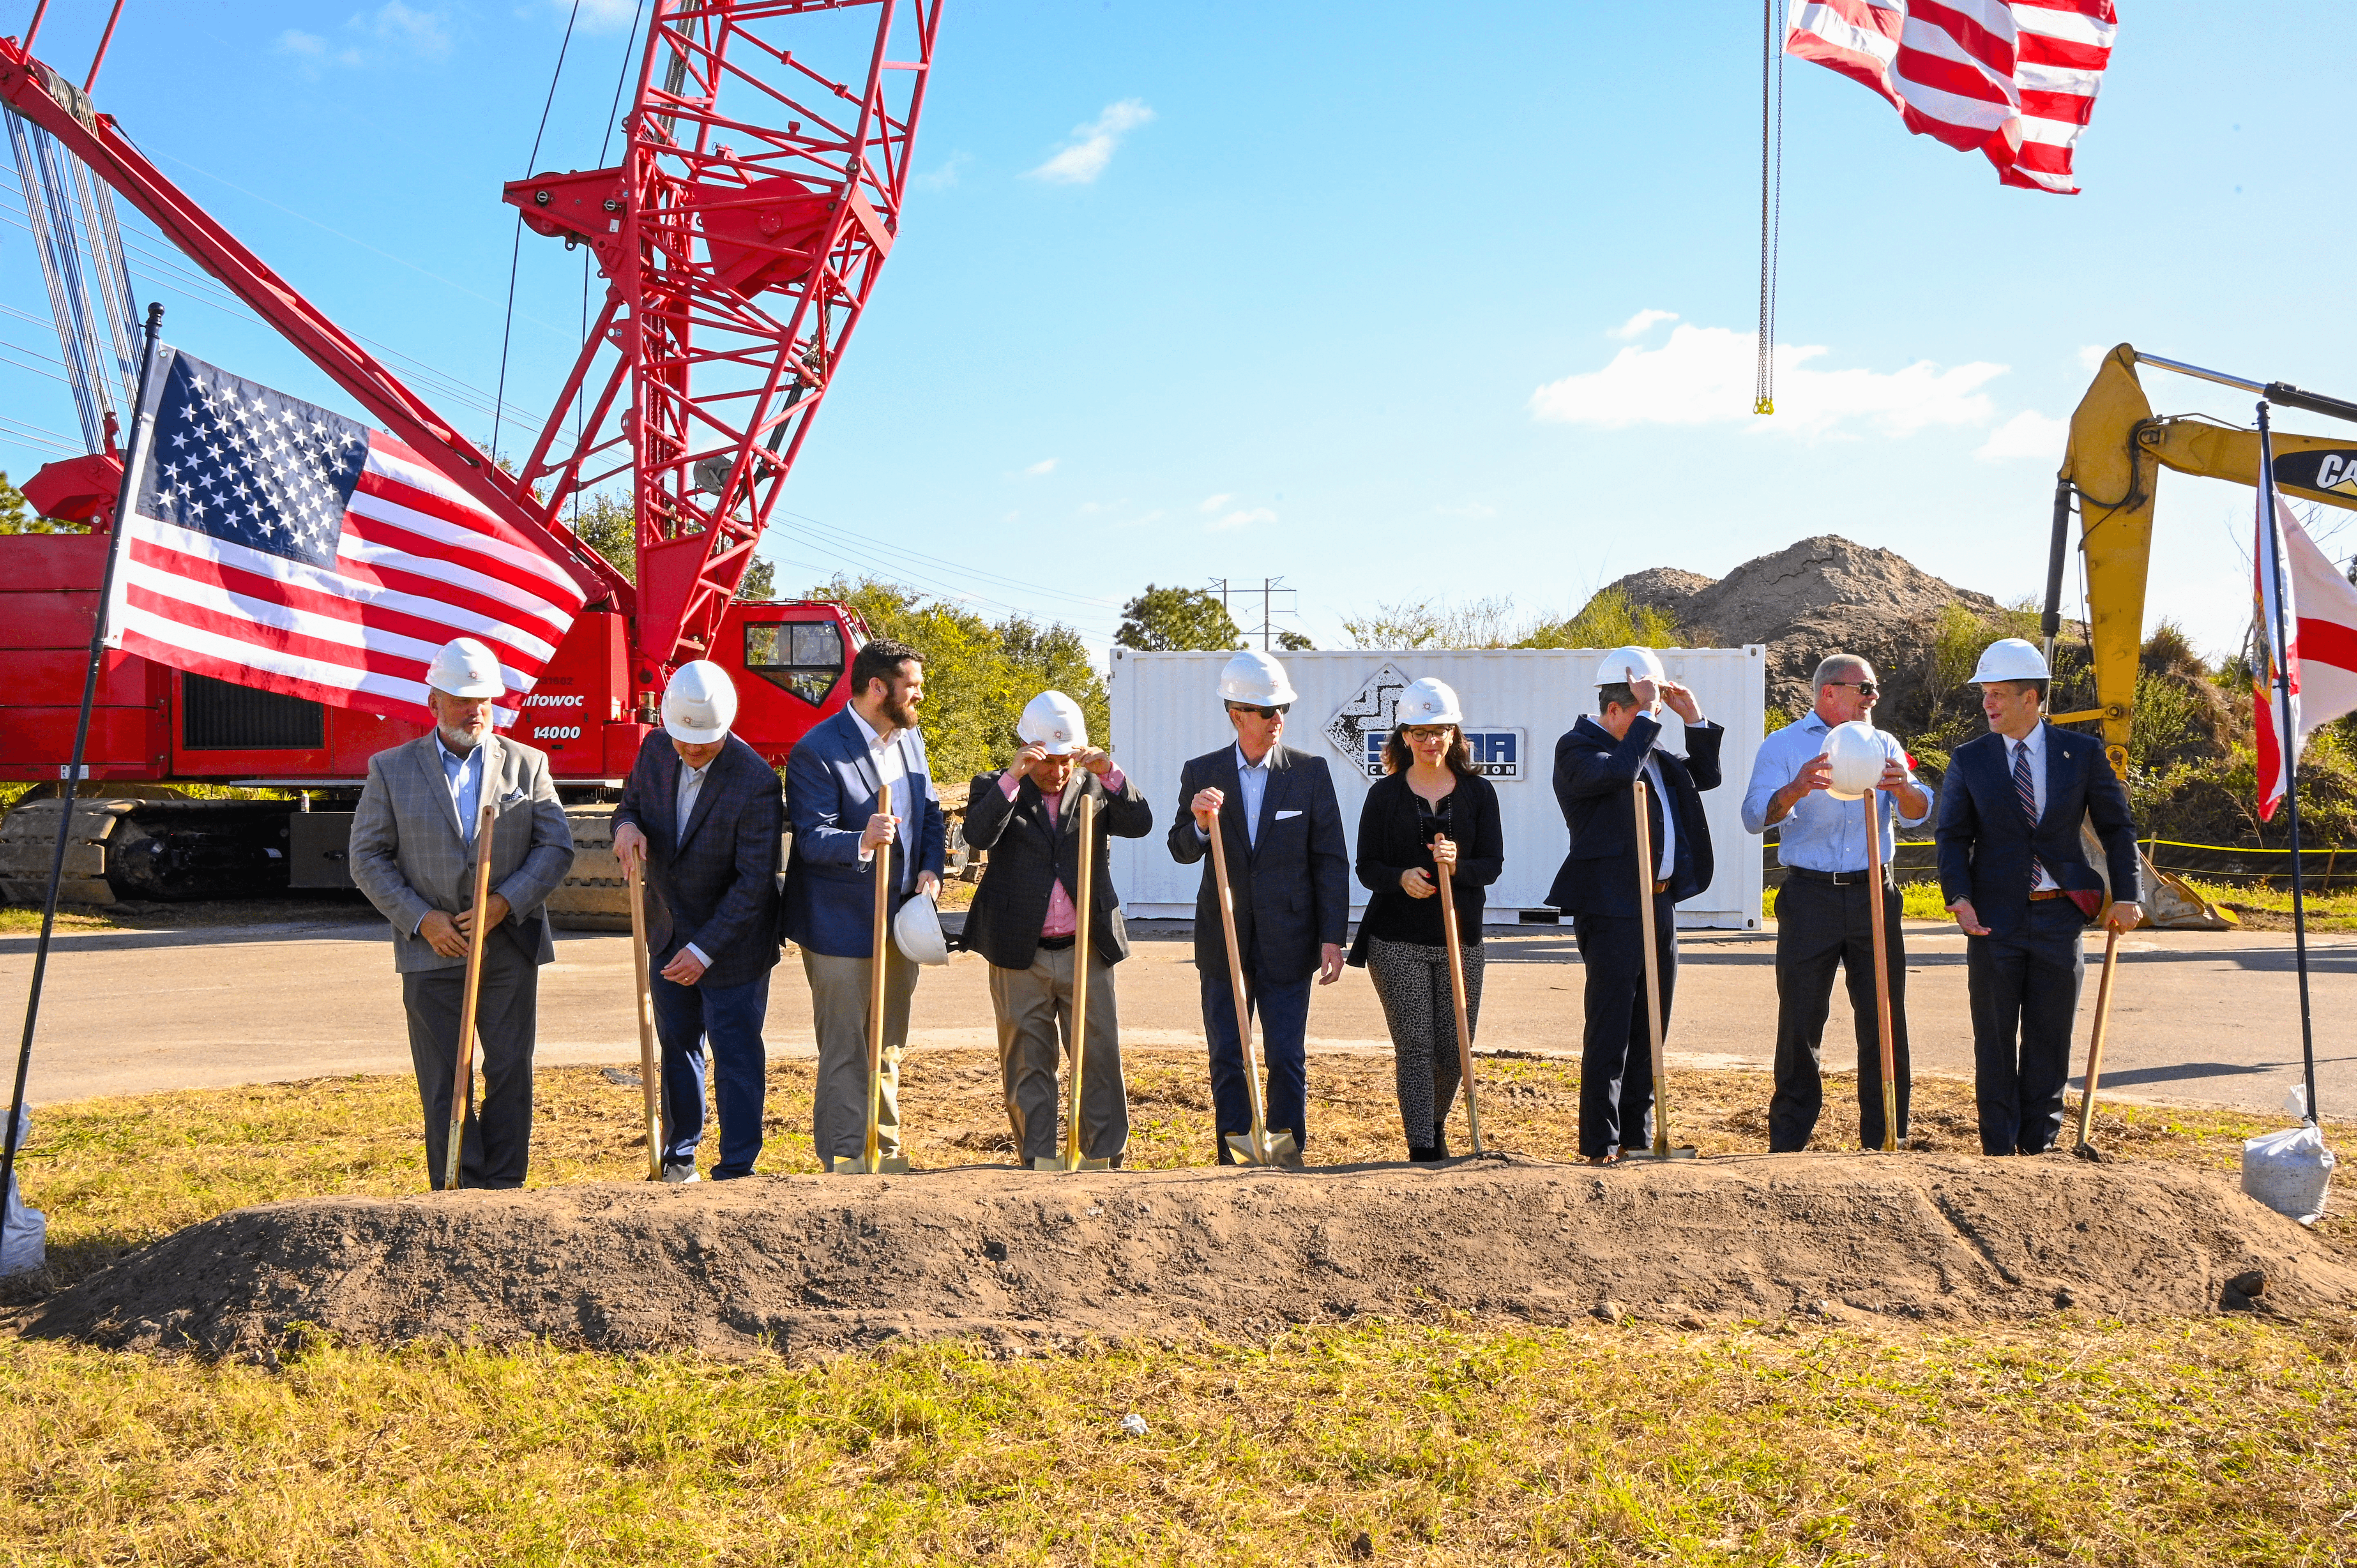 A group of 9 people in hardhats initiating the groundbreaking in front of a crane